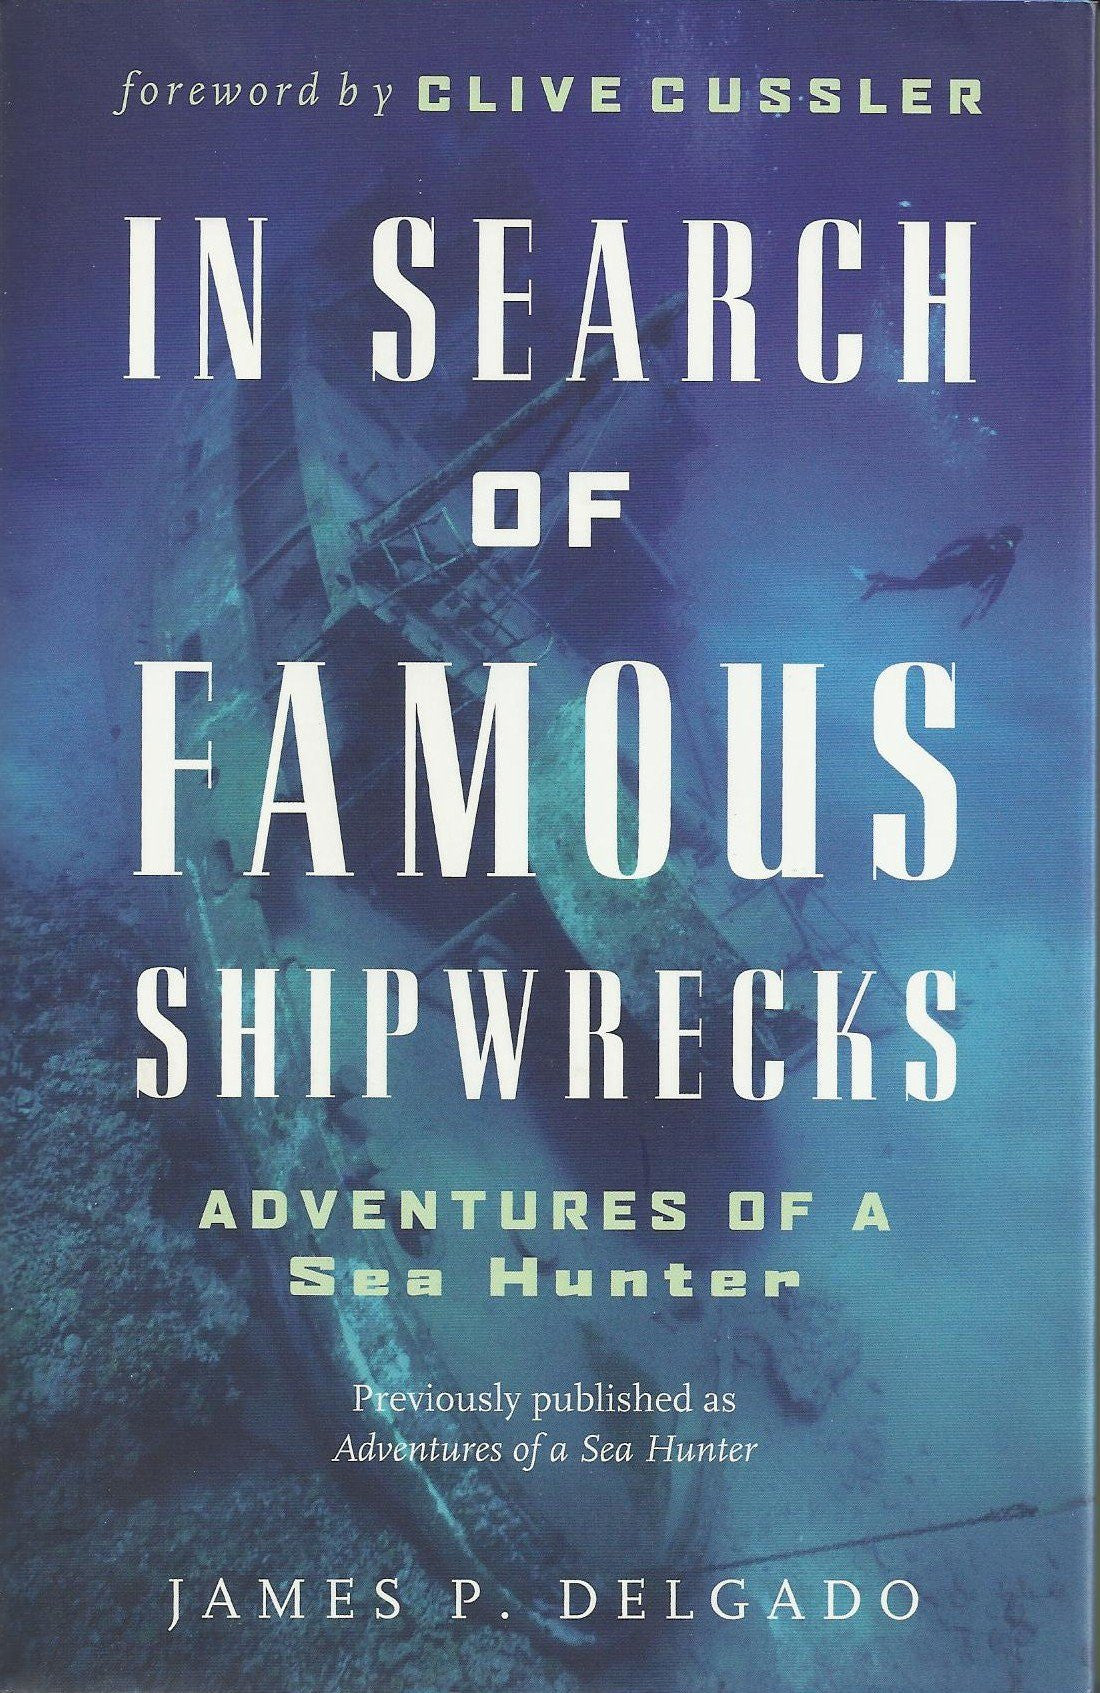 Adventures of a Sea Hunter: In Search of Famous Shipwrecks by James Delgado - Hardcover